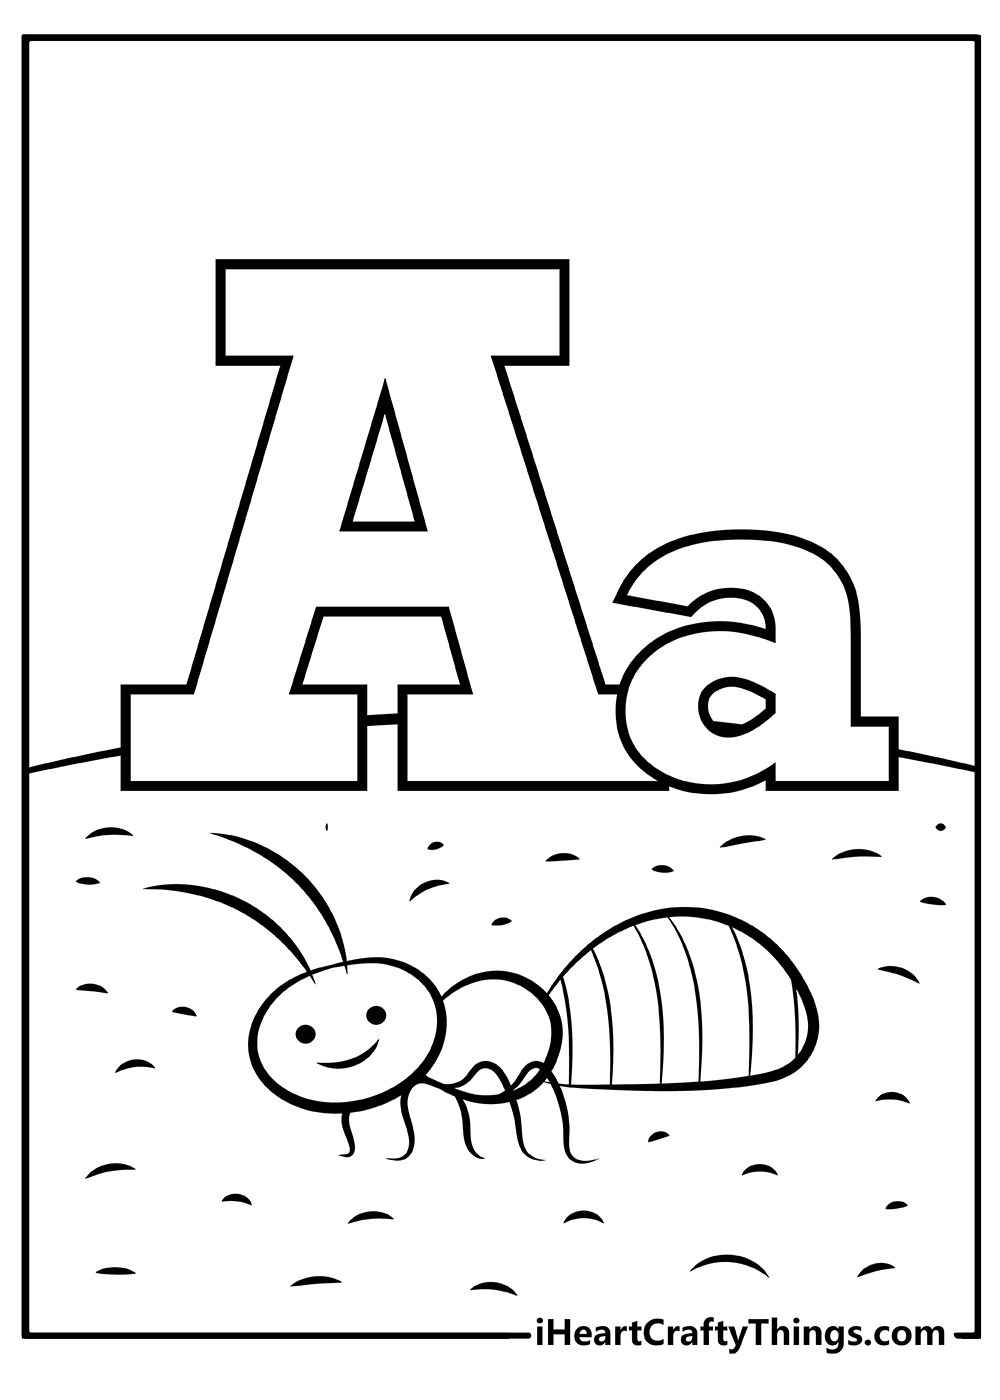 easy Alphabet Coloring Pages free printable